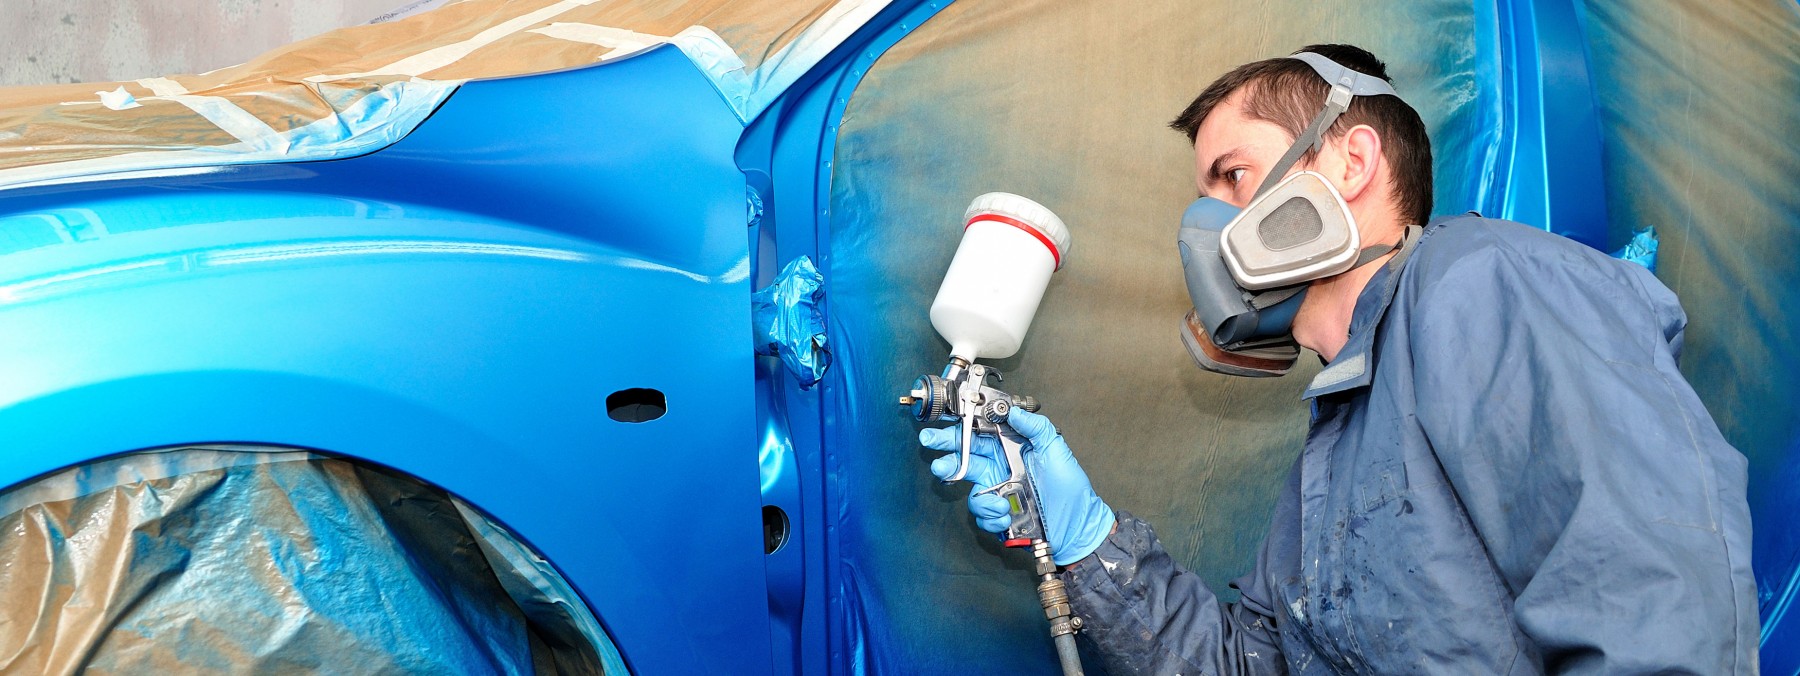 Car Paint | Automotive Paints And Coatings | An Insight